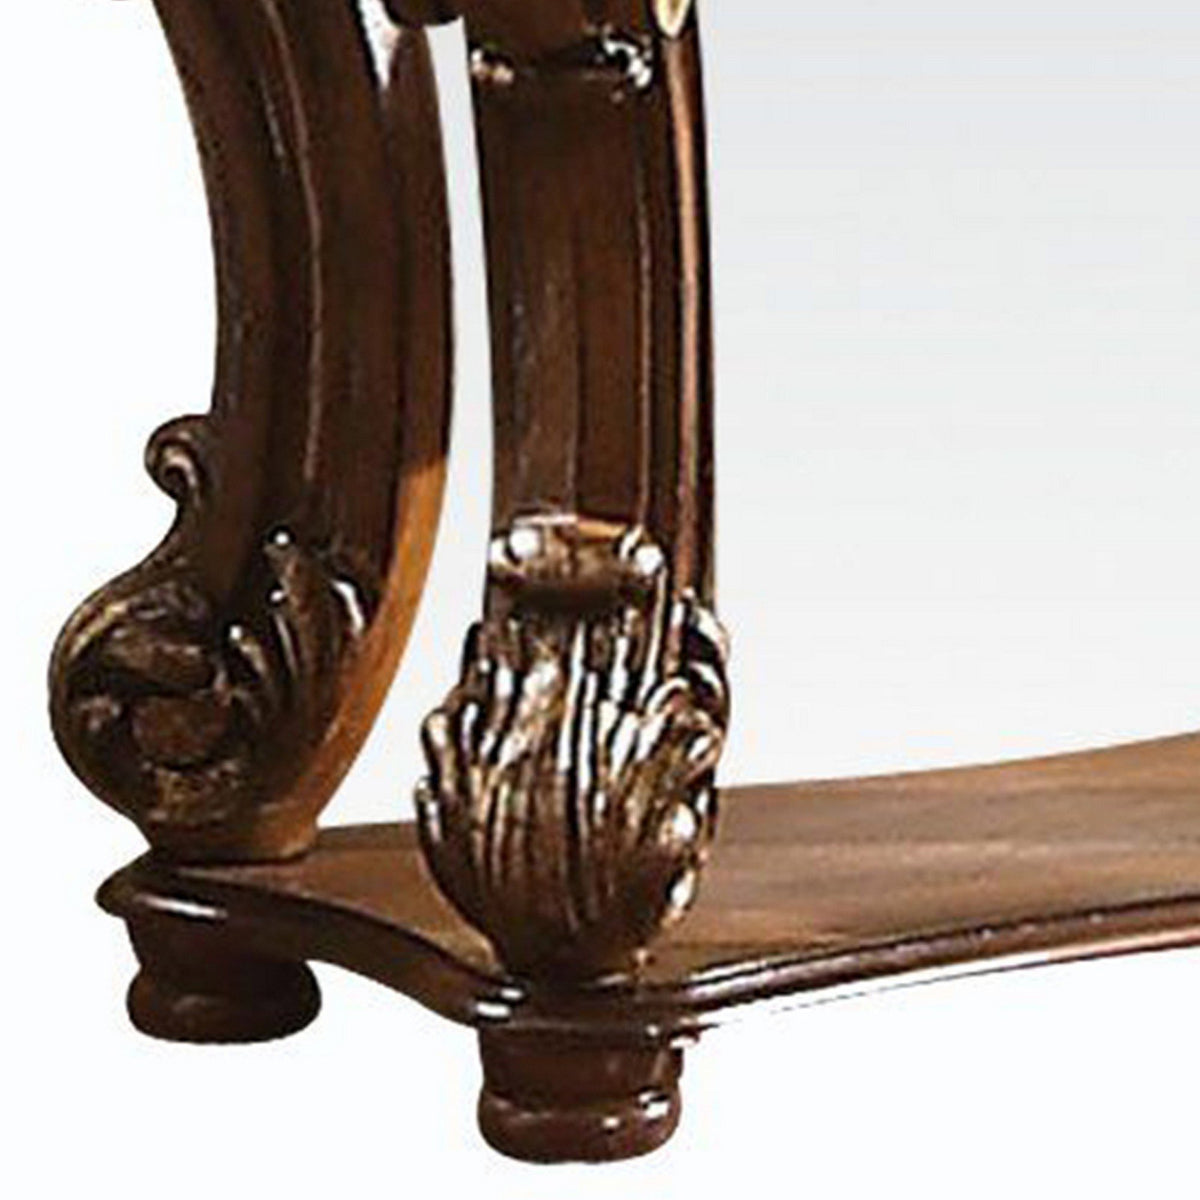 Royal Designed Wooden Side Table with Intricately Carved Body, Brown - BM221510